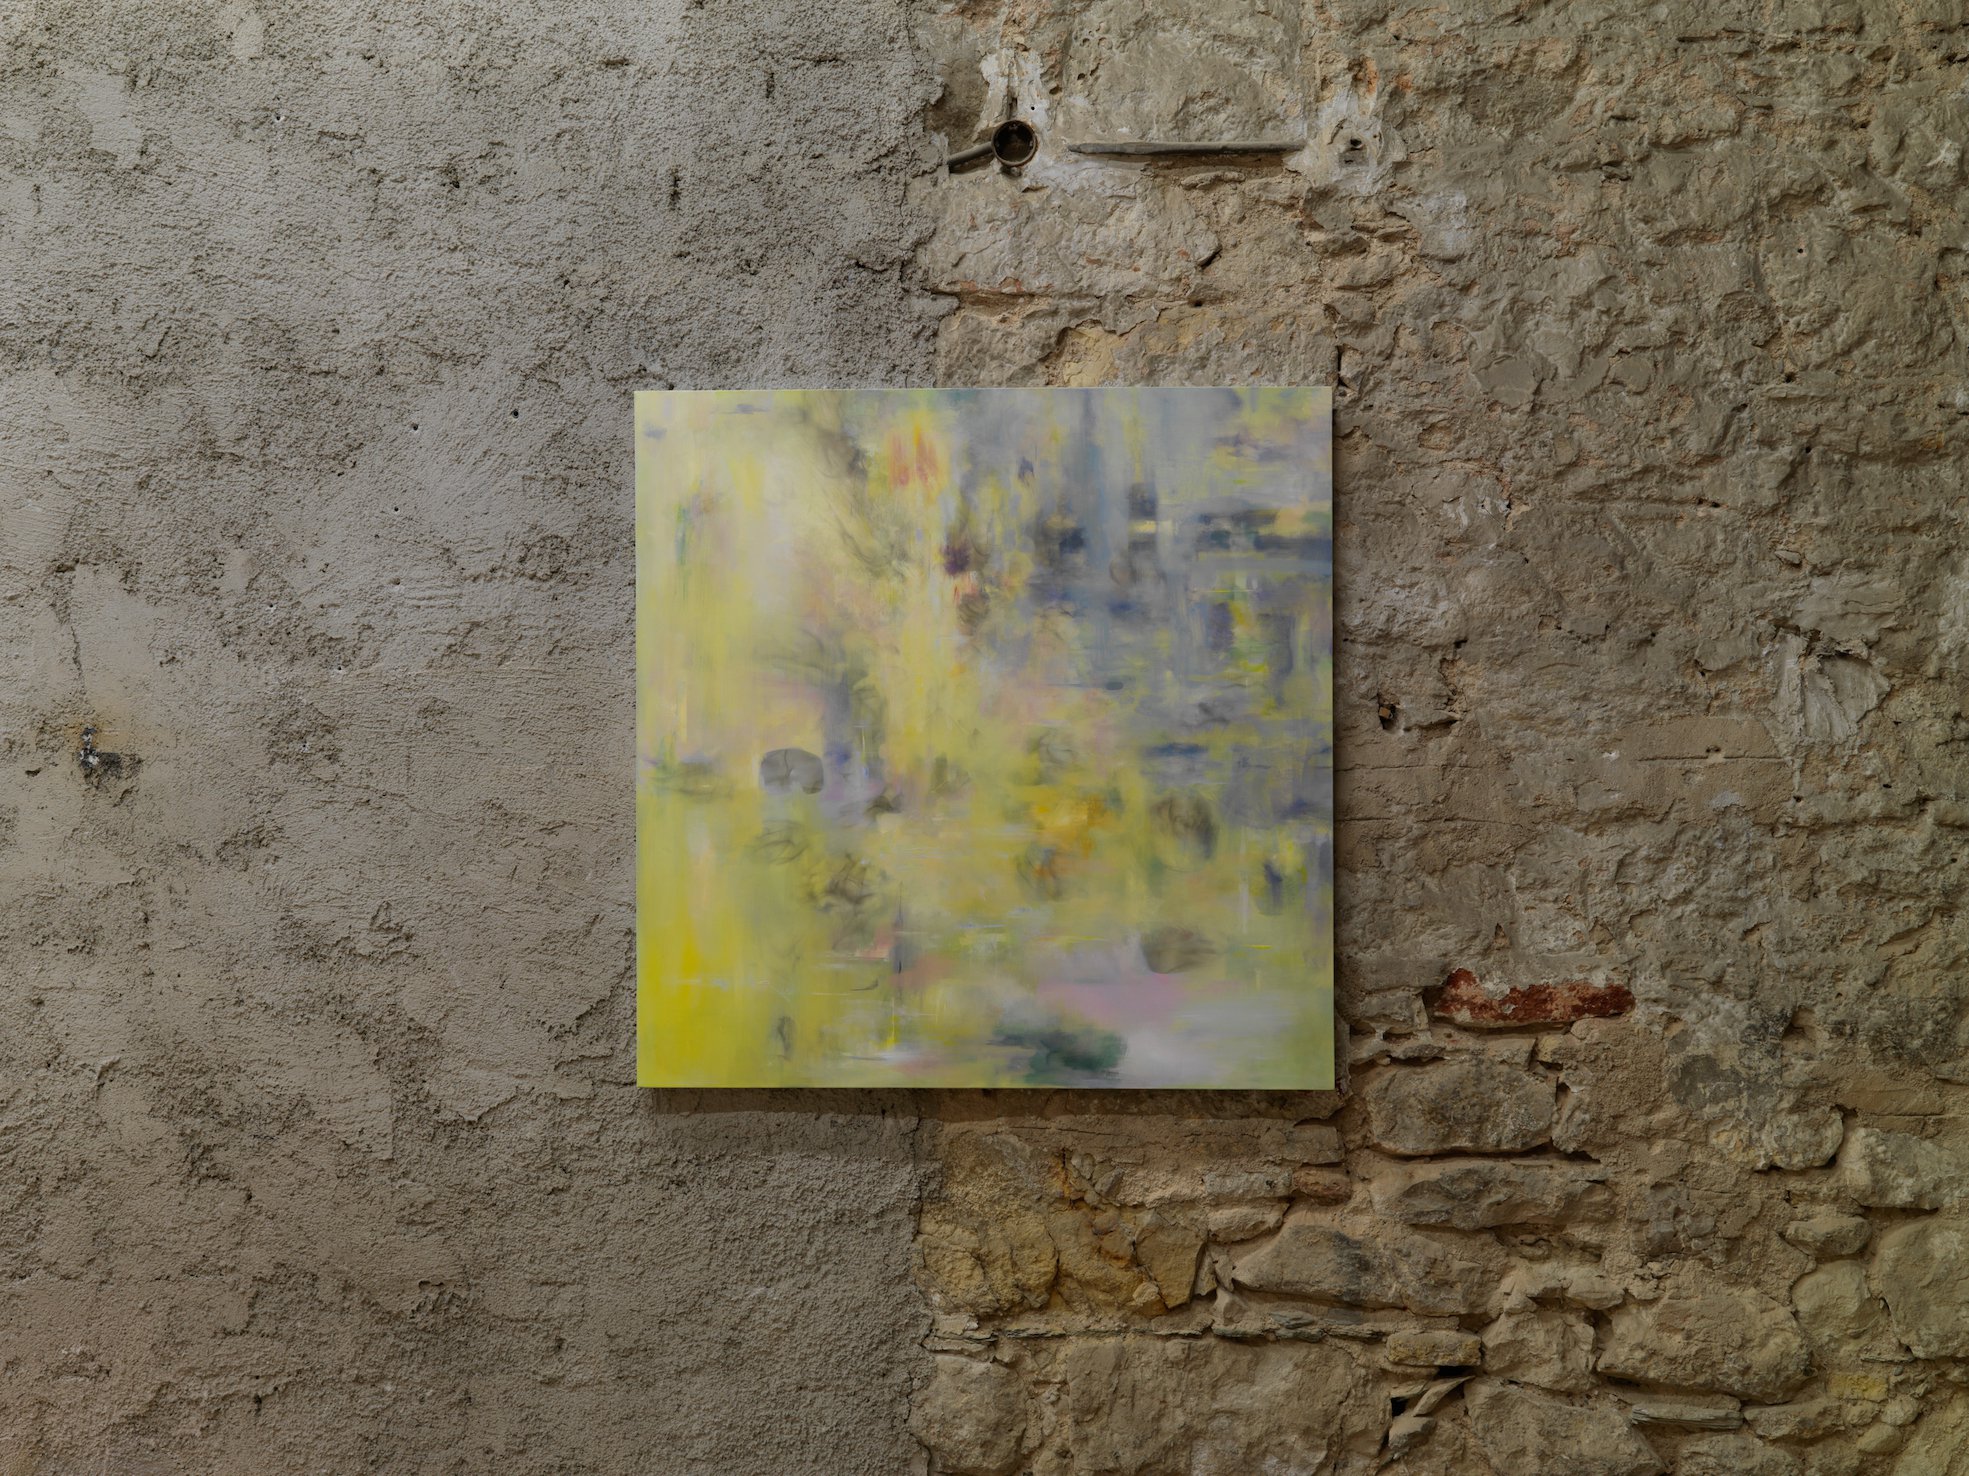 Eftihis Patsourakis, Untitled, oil, acrylic and smoke on canvas, 118 x 118 x 4 cm (46 1/2 x 46 1/2 x 1 5/8 in), 2022. Installation view, Ζωγραφική, Rodeo, Piraeus, 2023